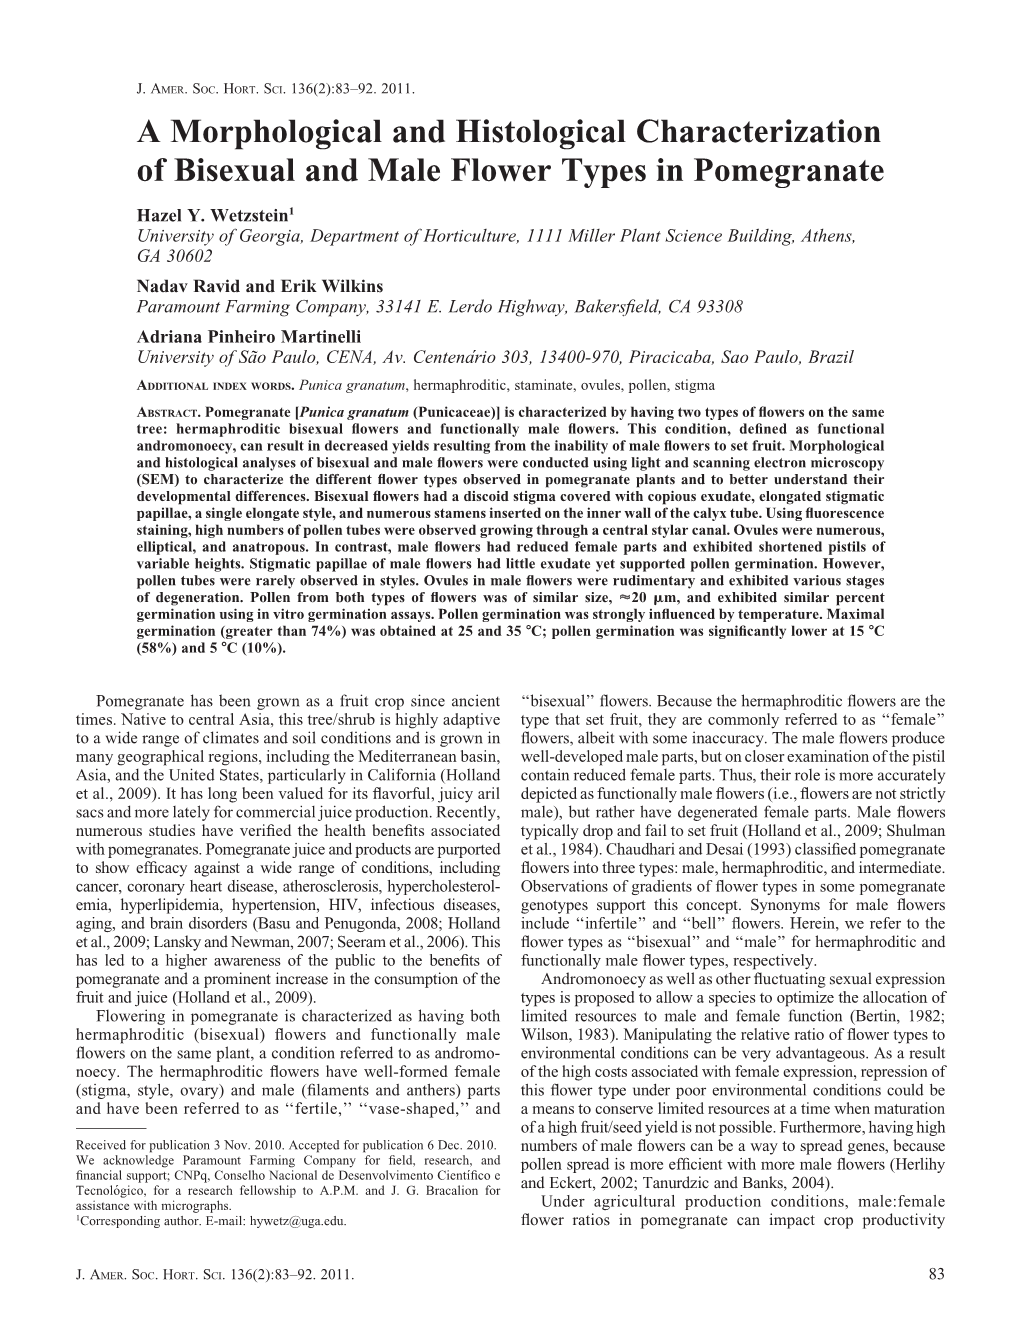 A Morphological and Histological Characterization of Bisexual and Male Flower Types in Pomegranate